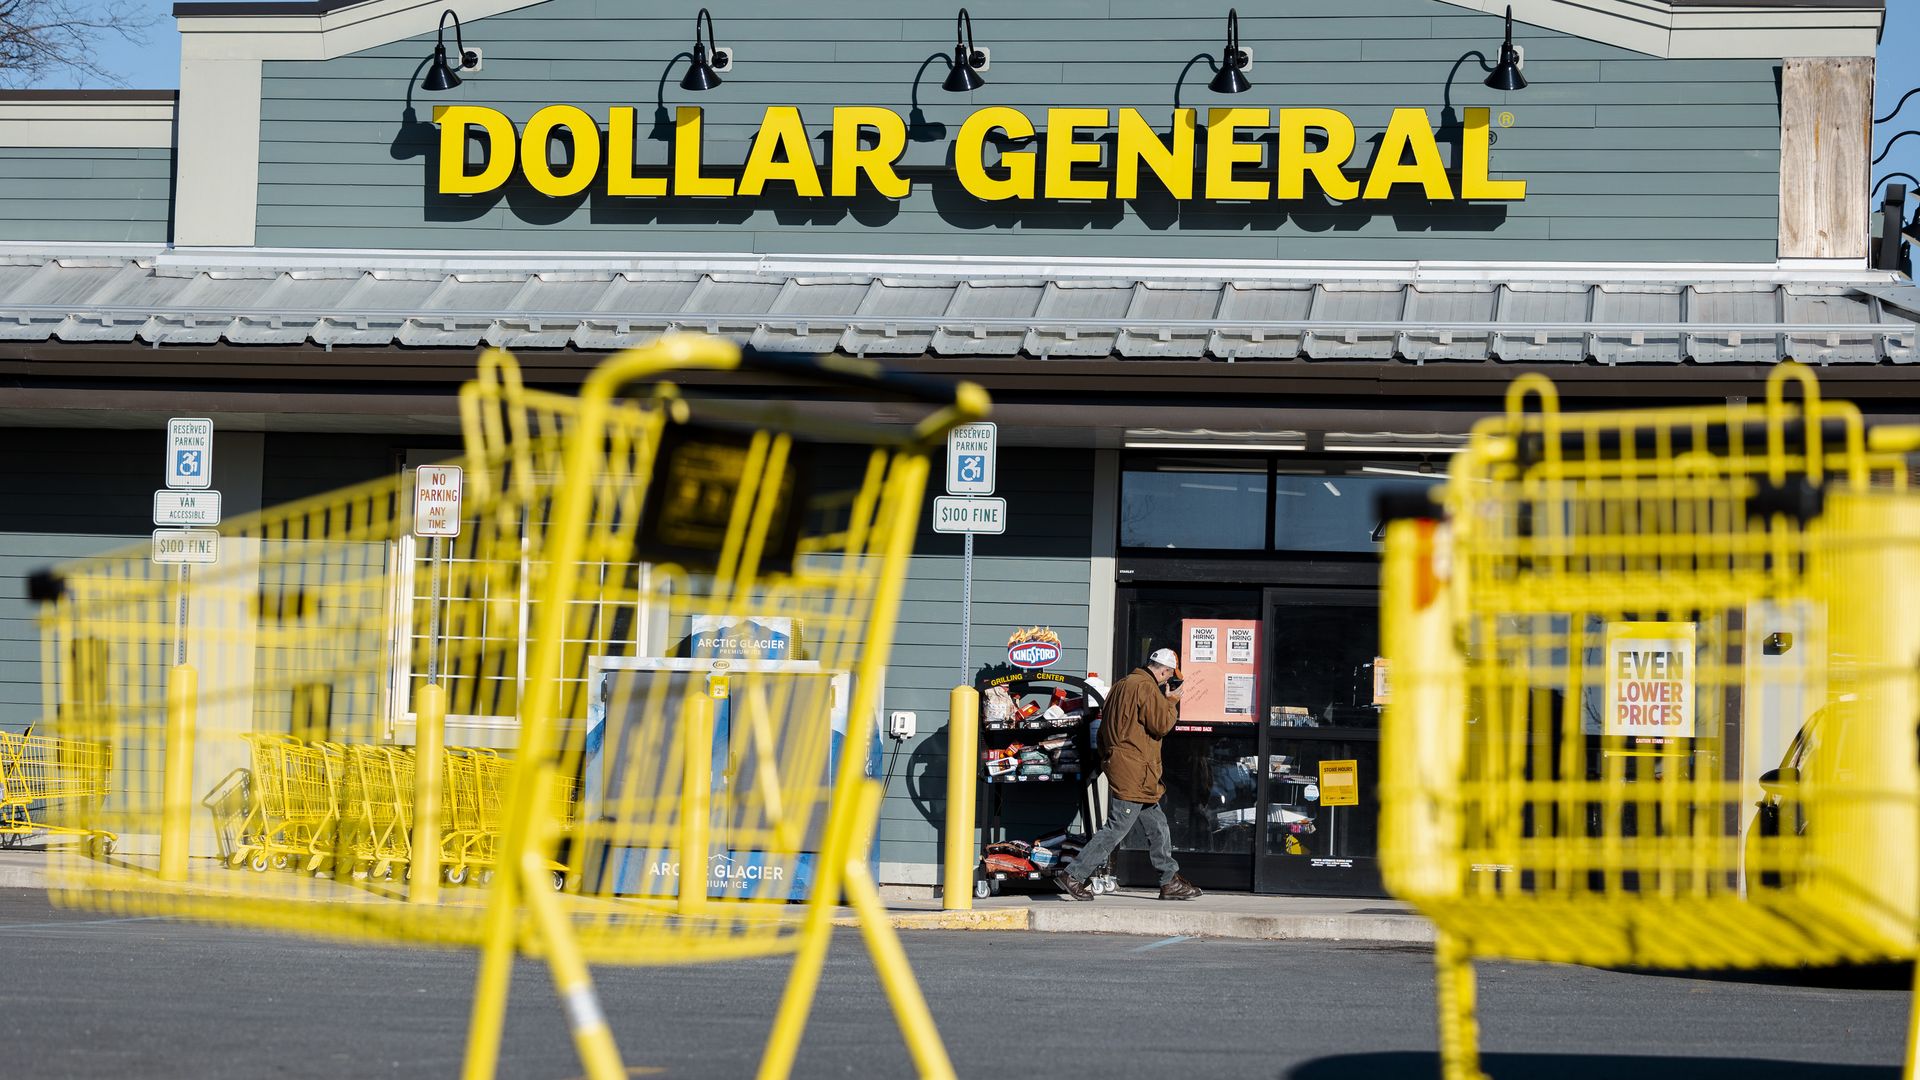 Two yellow grocery cards are out of focus in the foreground of a photo of a Dollar General in focus in the background.